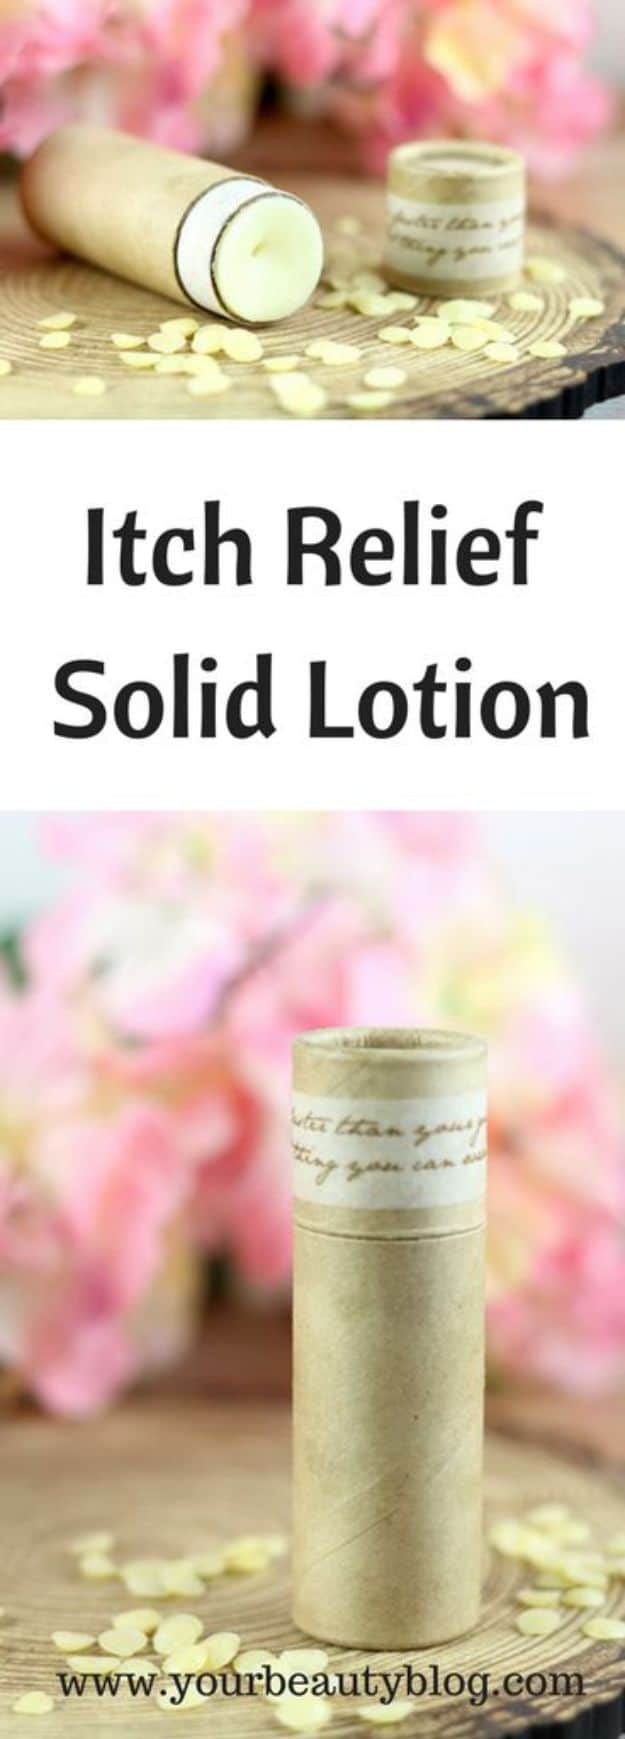 DIY Lotion Recipes - DIY Itch Relief Solid Lotion - How To Make Homemade Lotion - Natural Body and Skincare Recipe Ideas - Use Essential Oils, Coconut and Avocado and Shea Butter, Goats Milk, Lavender, Peppermint 